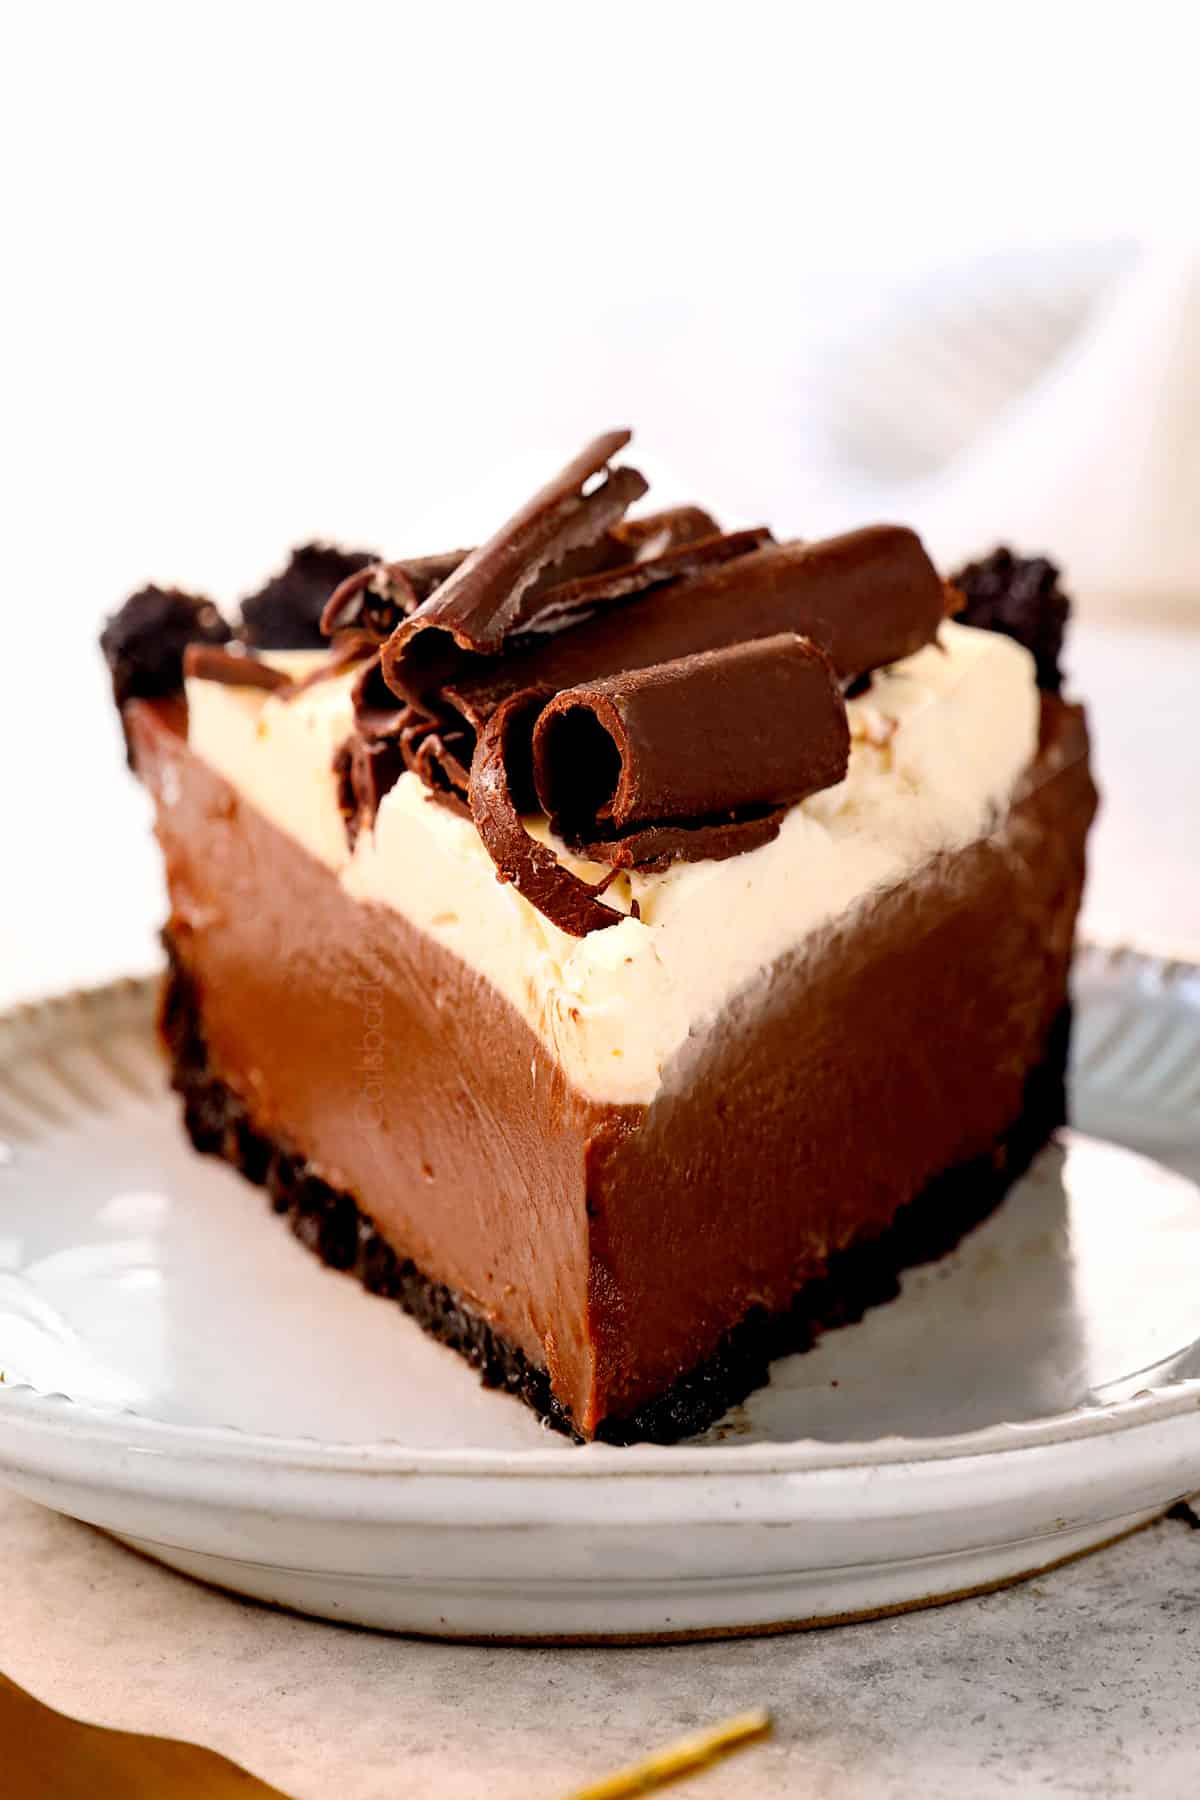 up close of a slice of chocolate cream pie topped with chocolate shavings